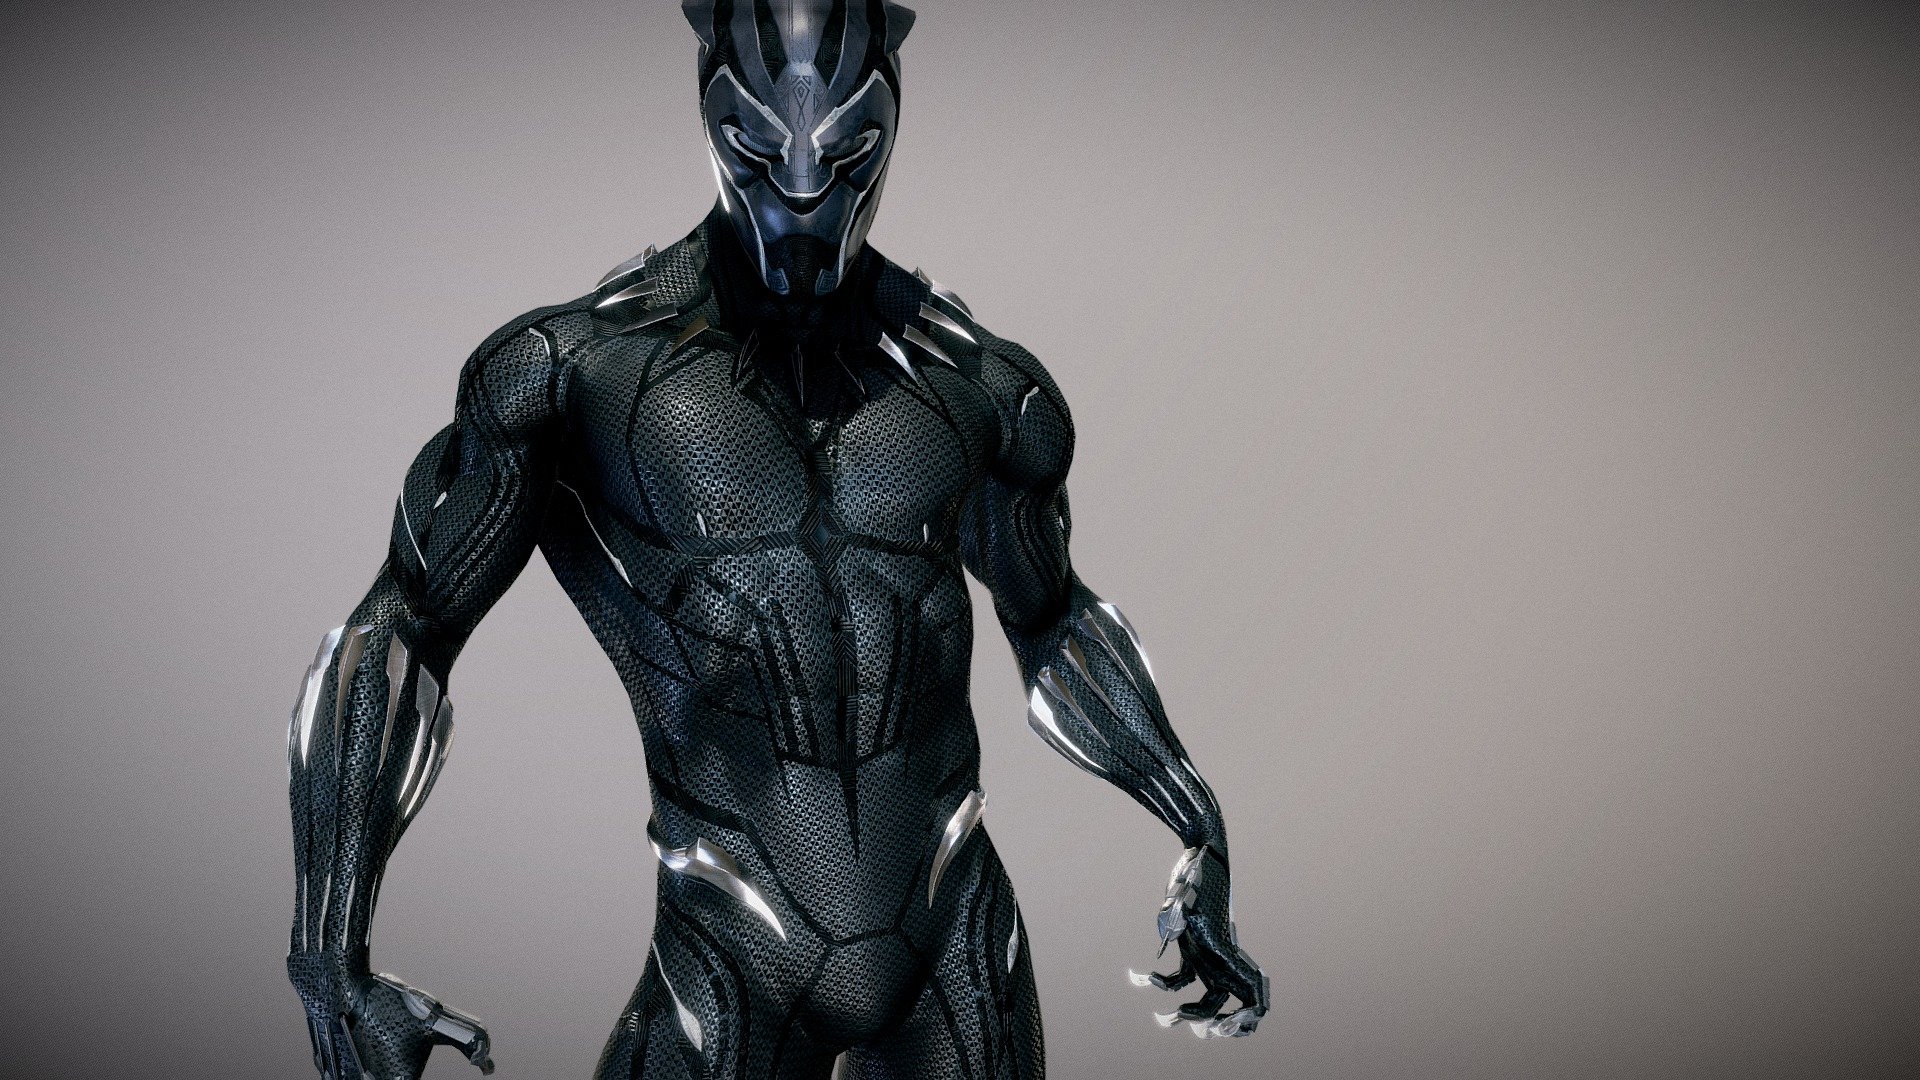 The King of Wakanda! My take on the Black Panther. The suit from the movie was so beautifully done I had to make a version of it. The only main difference is the design of the ears. I preferred the more aggressive look of the ears tilted toward the back. I just recently relized SketchFab can take 4K textures so now you can see the hard word I put into Substance Painter 3d model